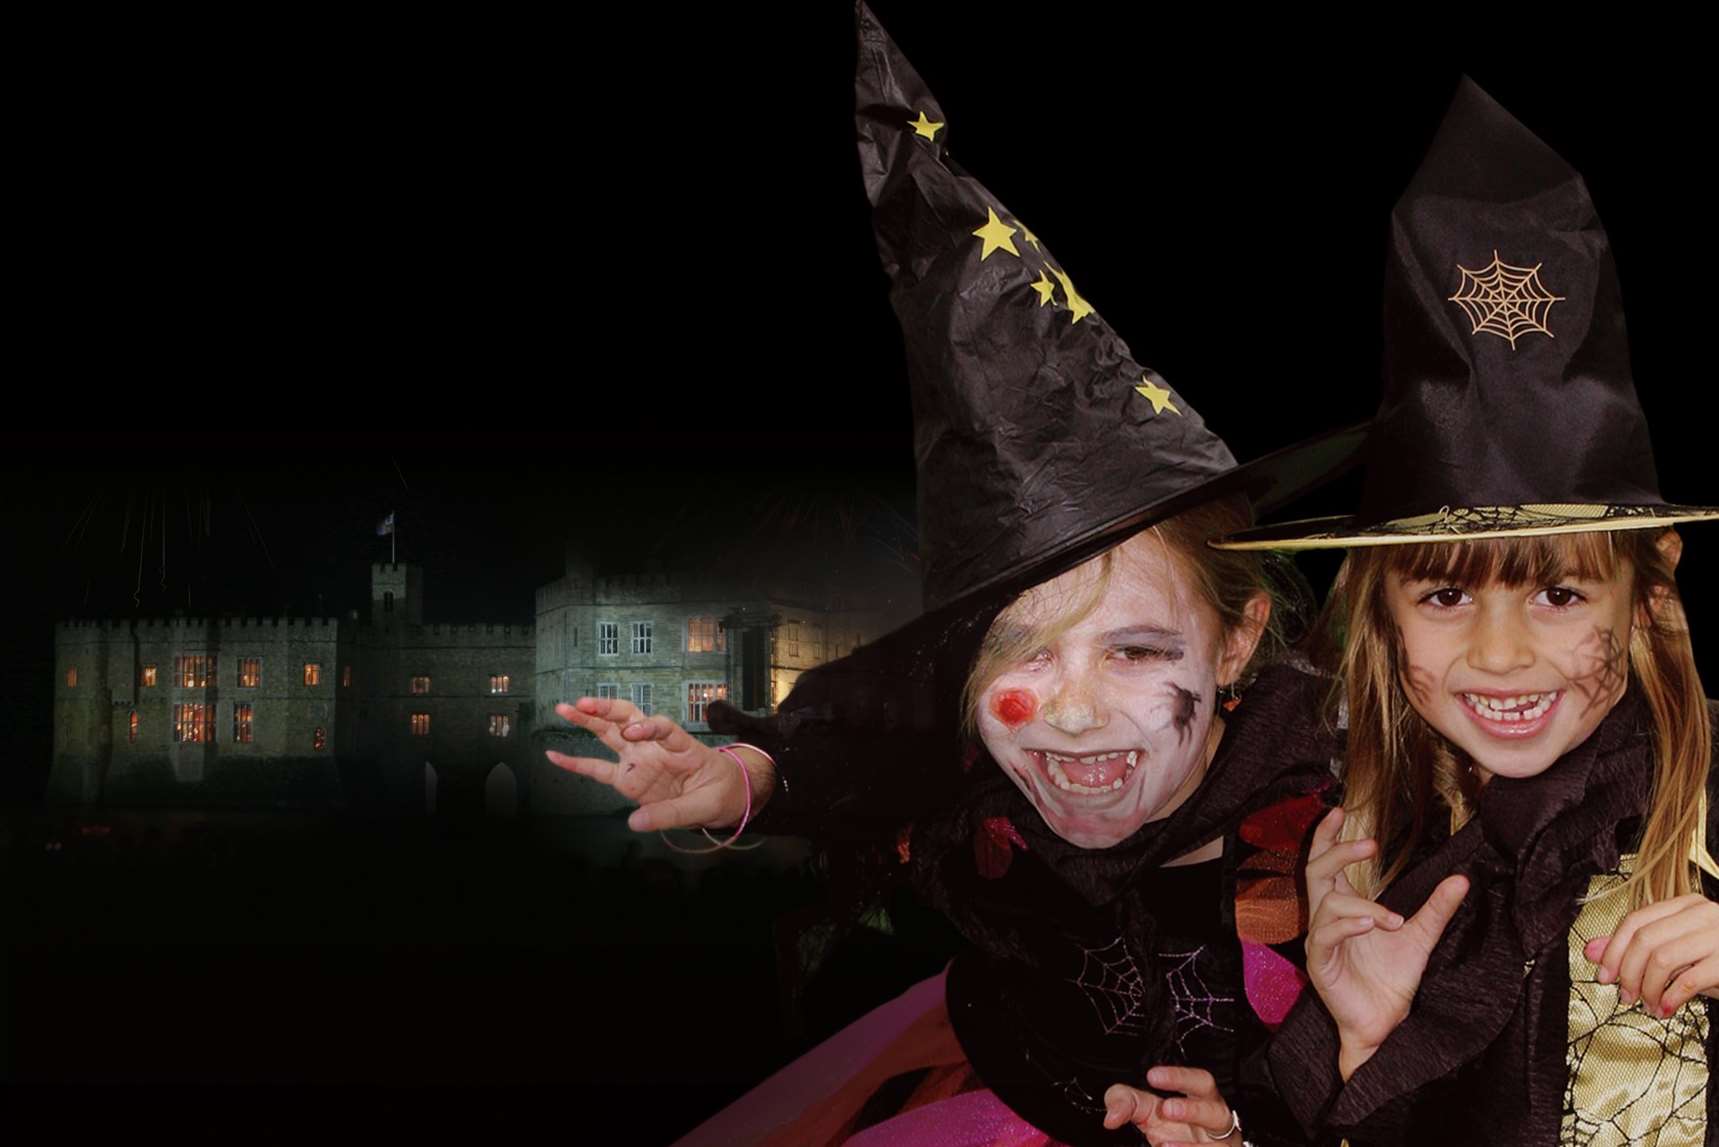 Things are going to get spooky at Leeds Castle this half term